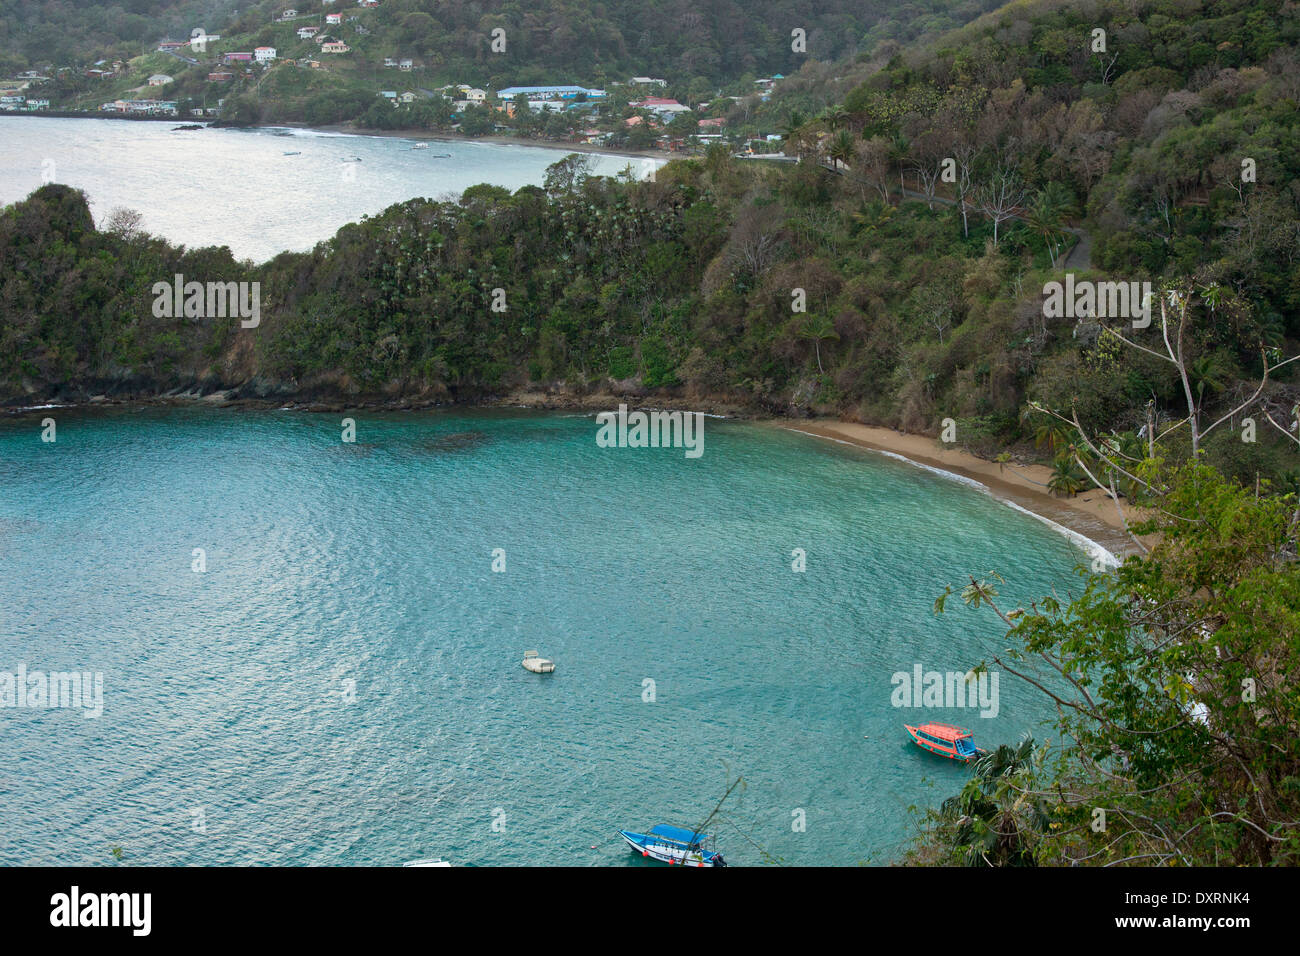 Batteaux Bay at Speyside, on the Atlantic coast of Tobago. Stock Photo